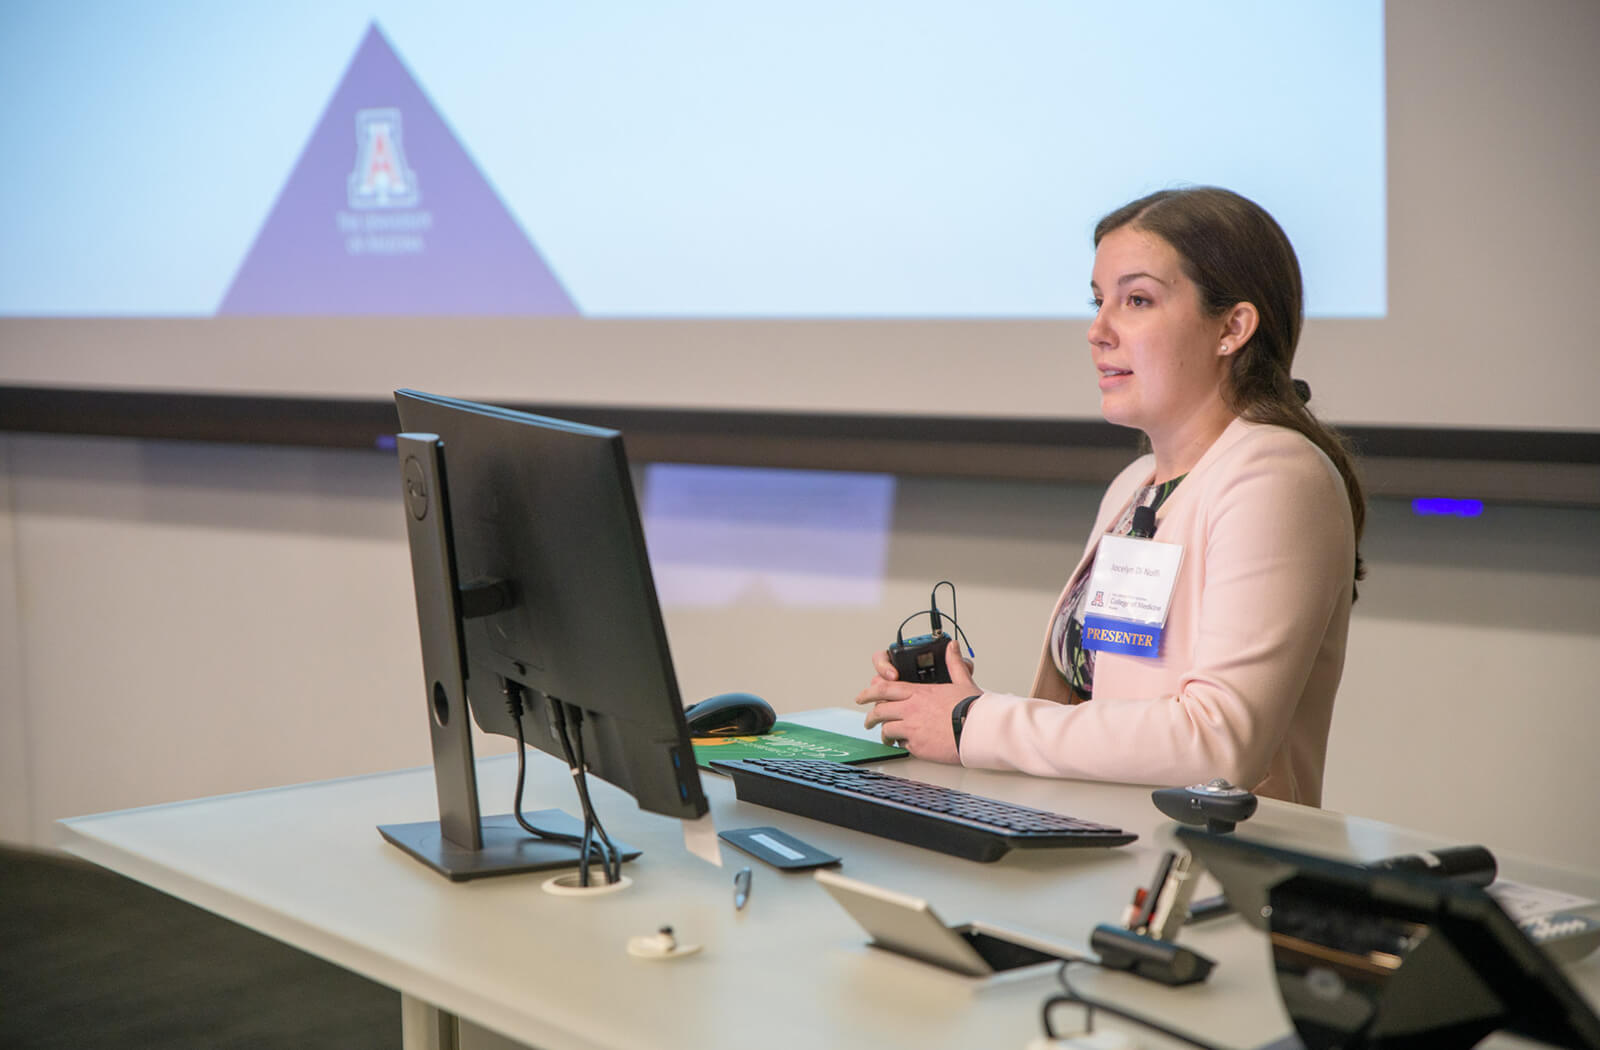 Medical Student Jocelyn Di Nolfi Presents at the Annual Scholarly Project Research Symposium